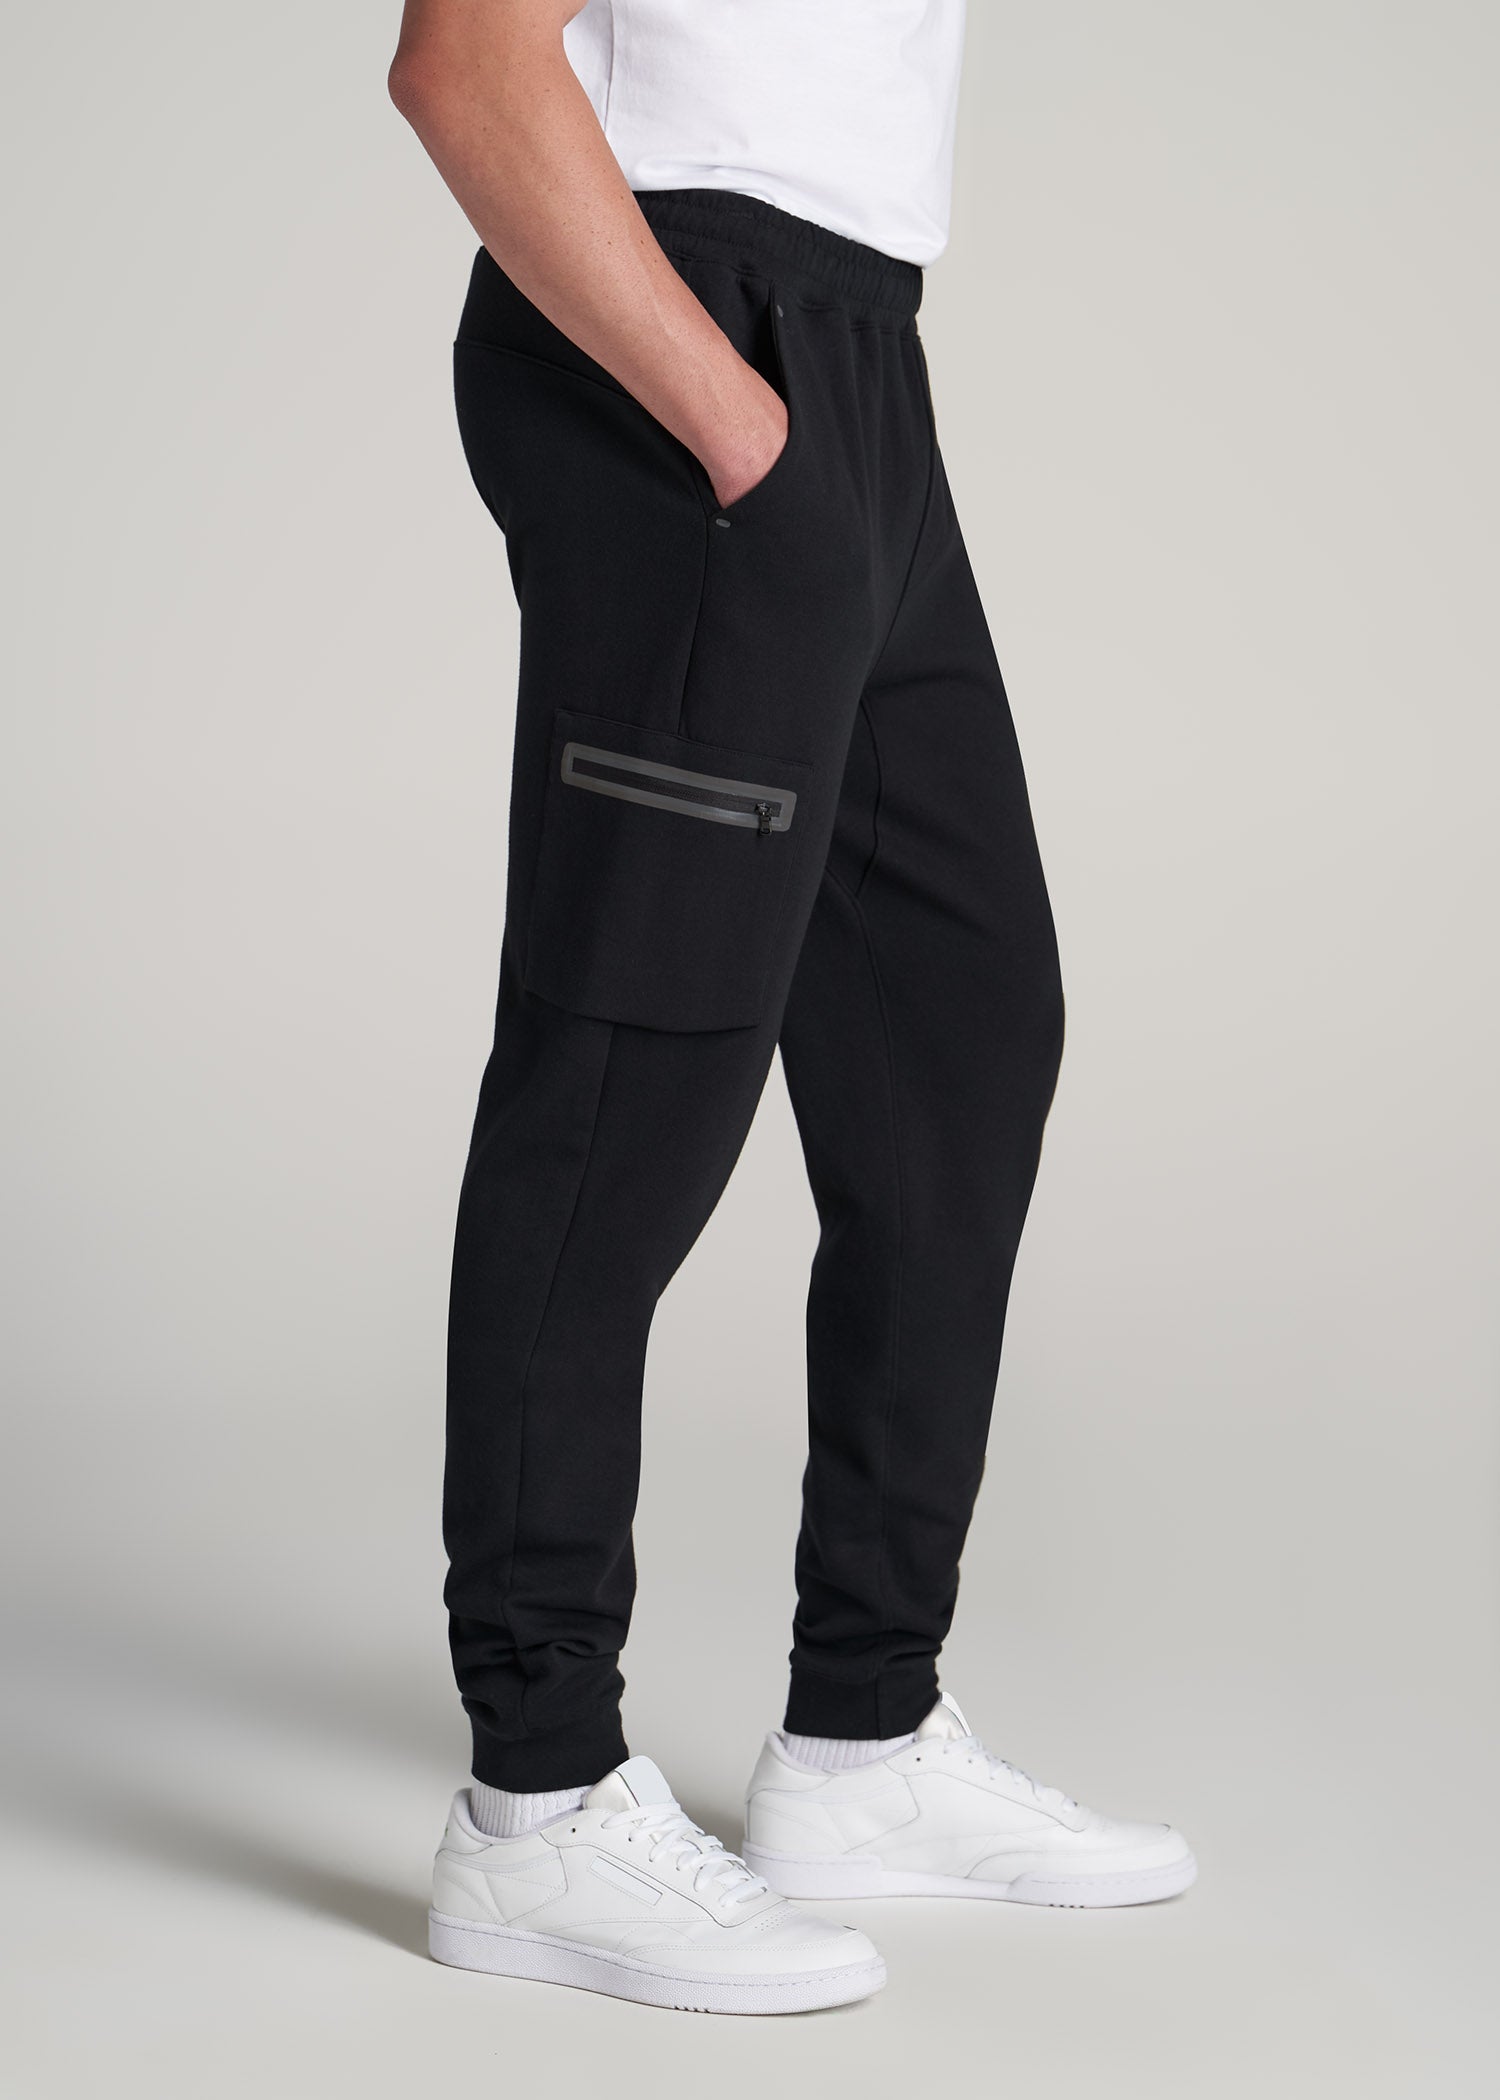 Relaxed Fit Cargo joggers - Black - Men